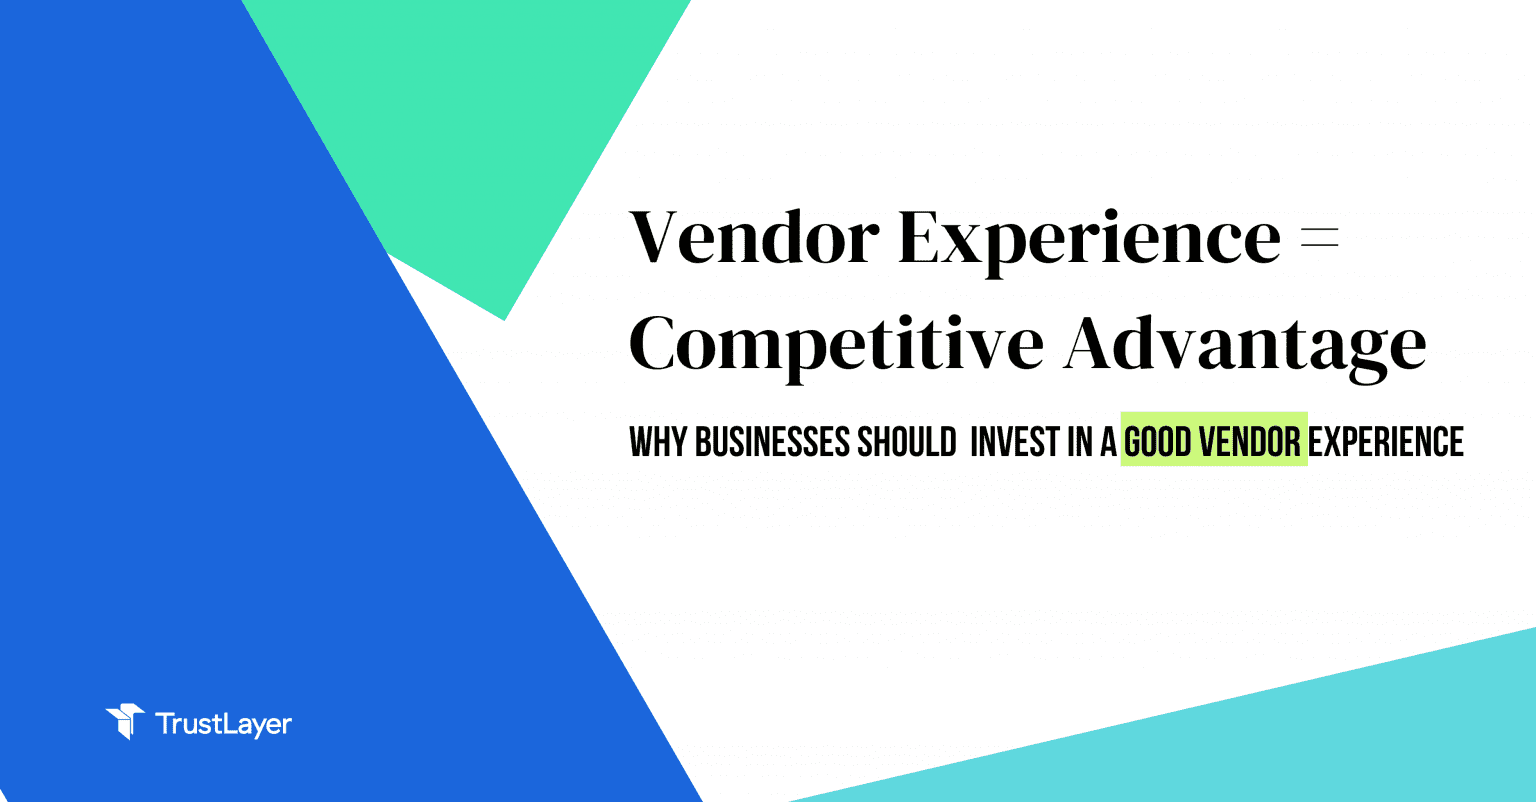 Why Businesses Should Take the Time to Invest in a Good Vendor Experience